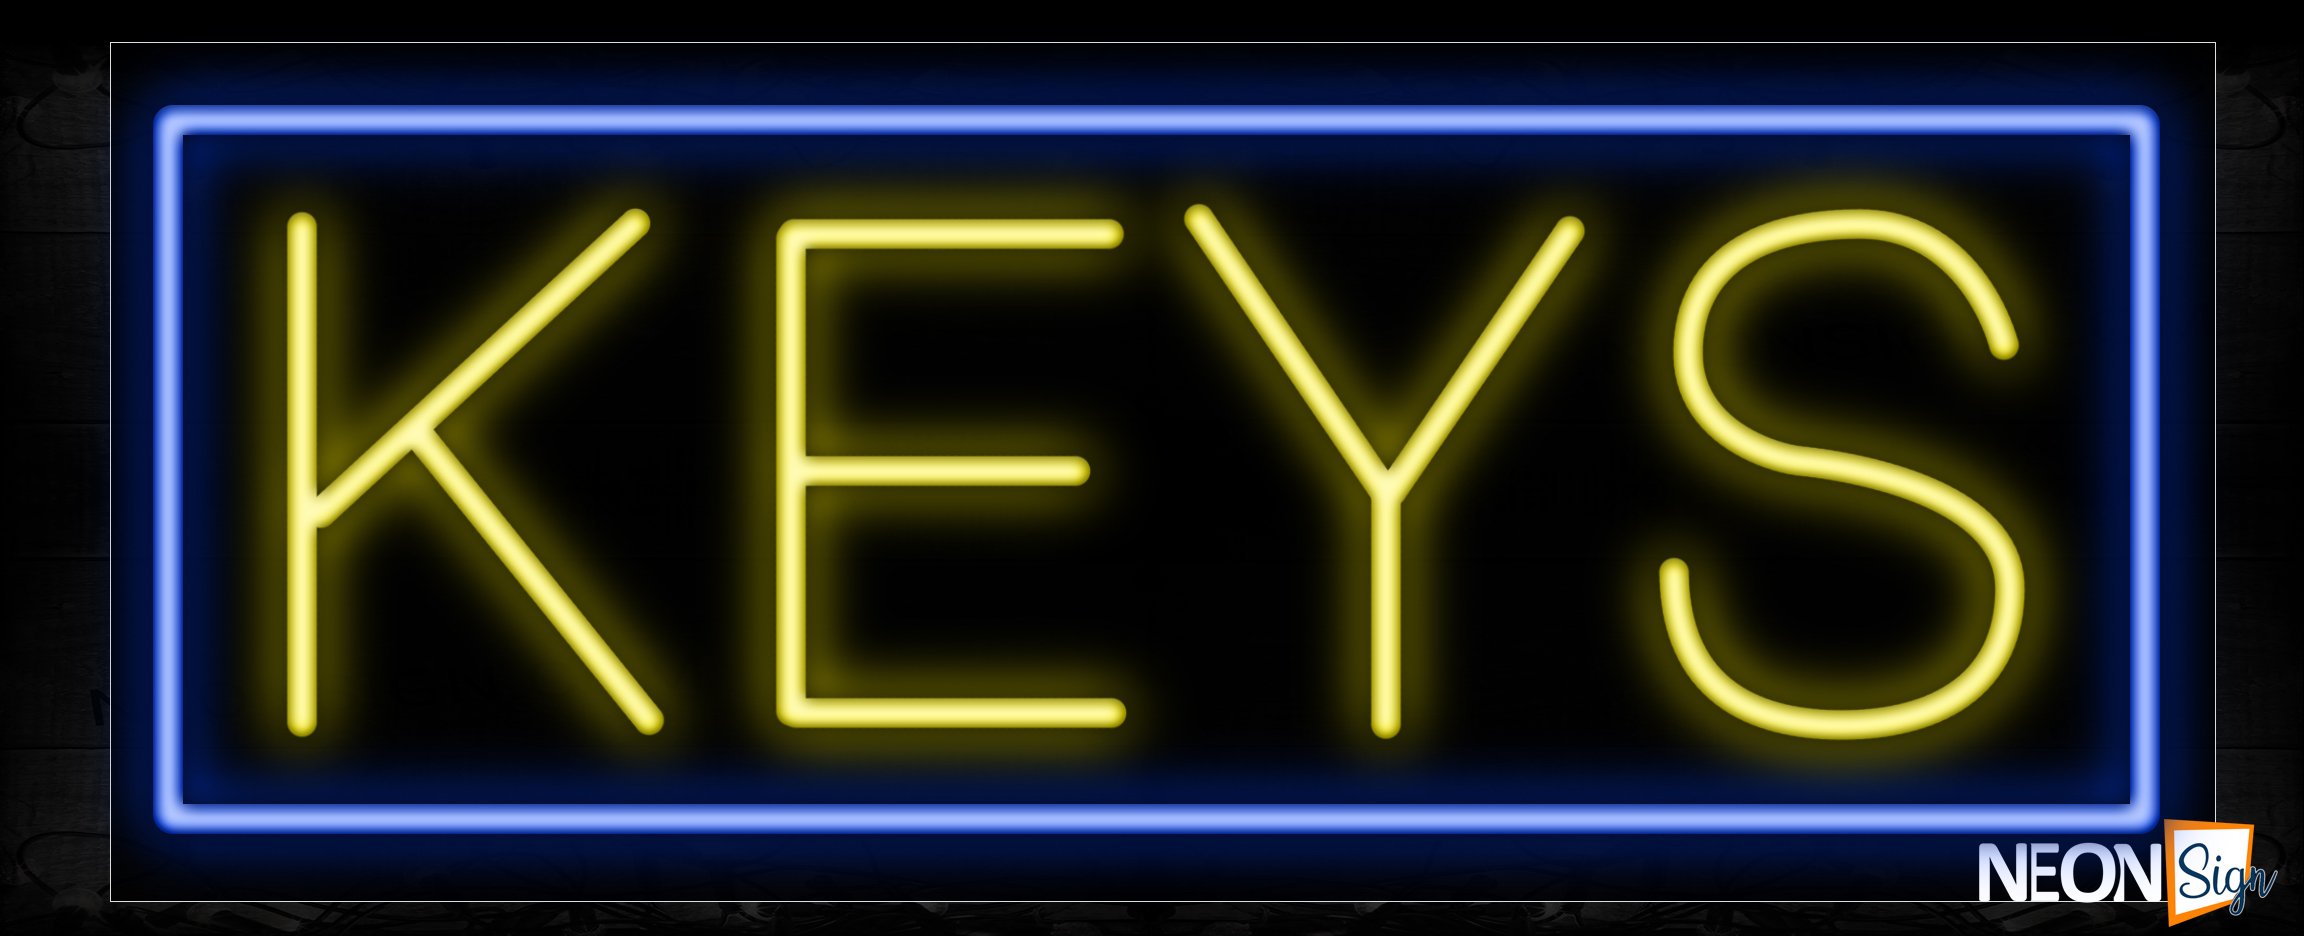 Image of 10083 Keys in yellow with blue border Neon Sign_13x32 Black Backing